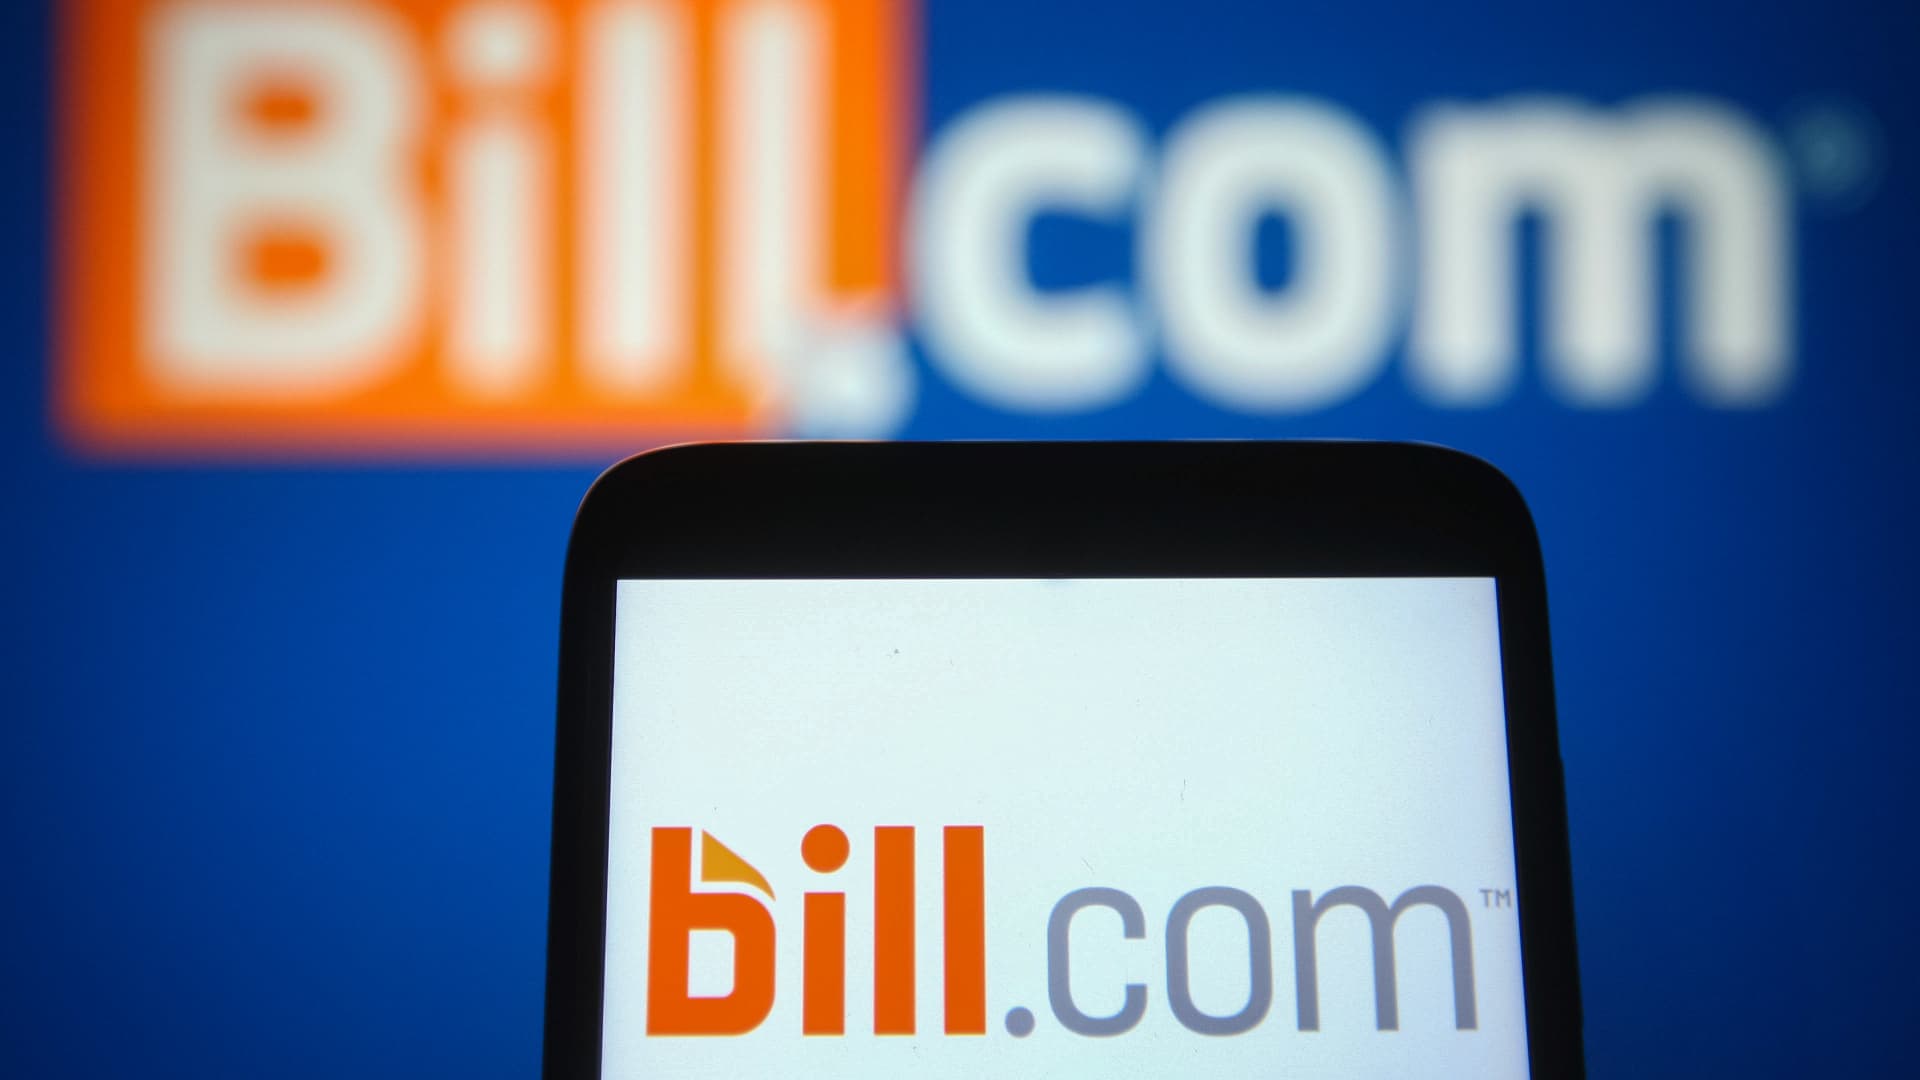 Bill Pay stock Bill.com is a buy and could rally 30%, says Morgan Stanley